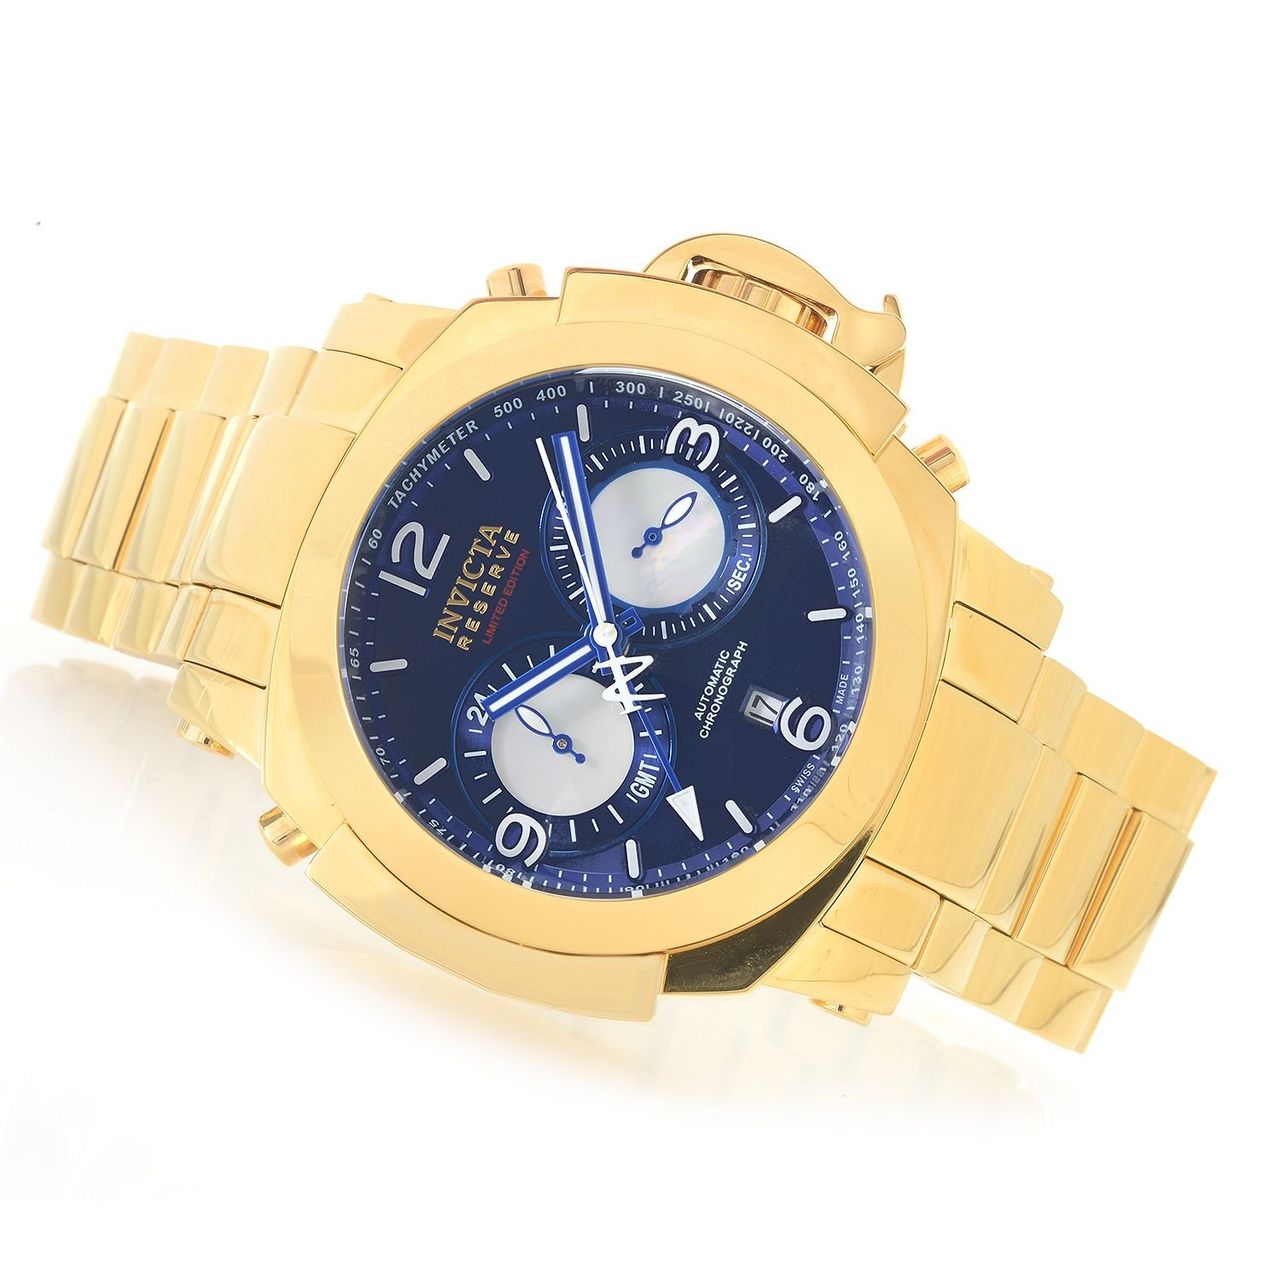 Invicta 19722 Mens Blue Dial Analog Automatic Watch with Stainless Steel Strap